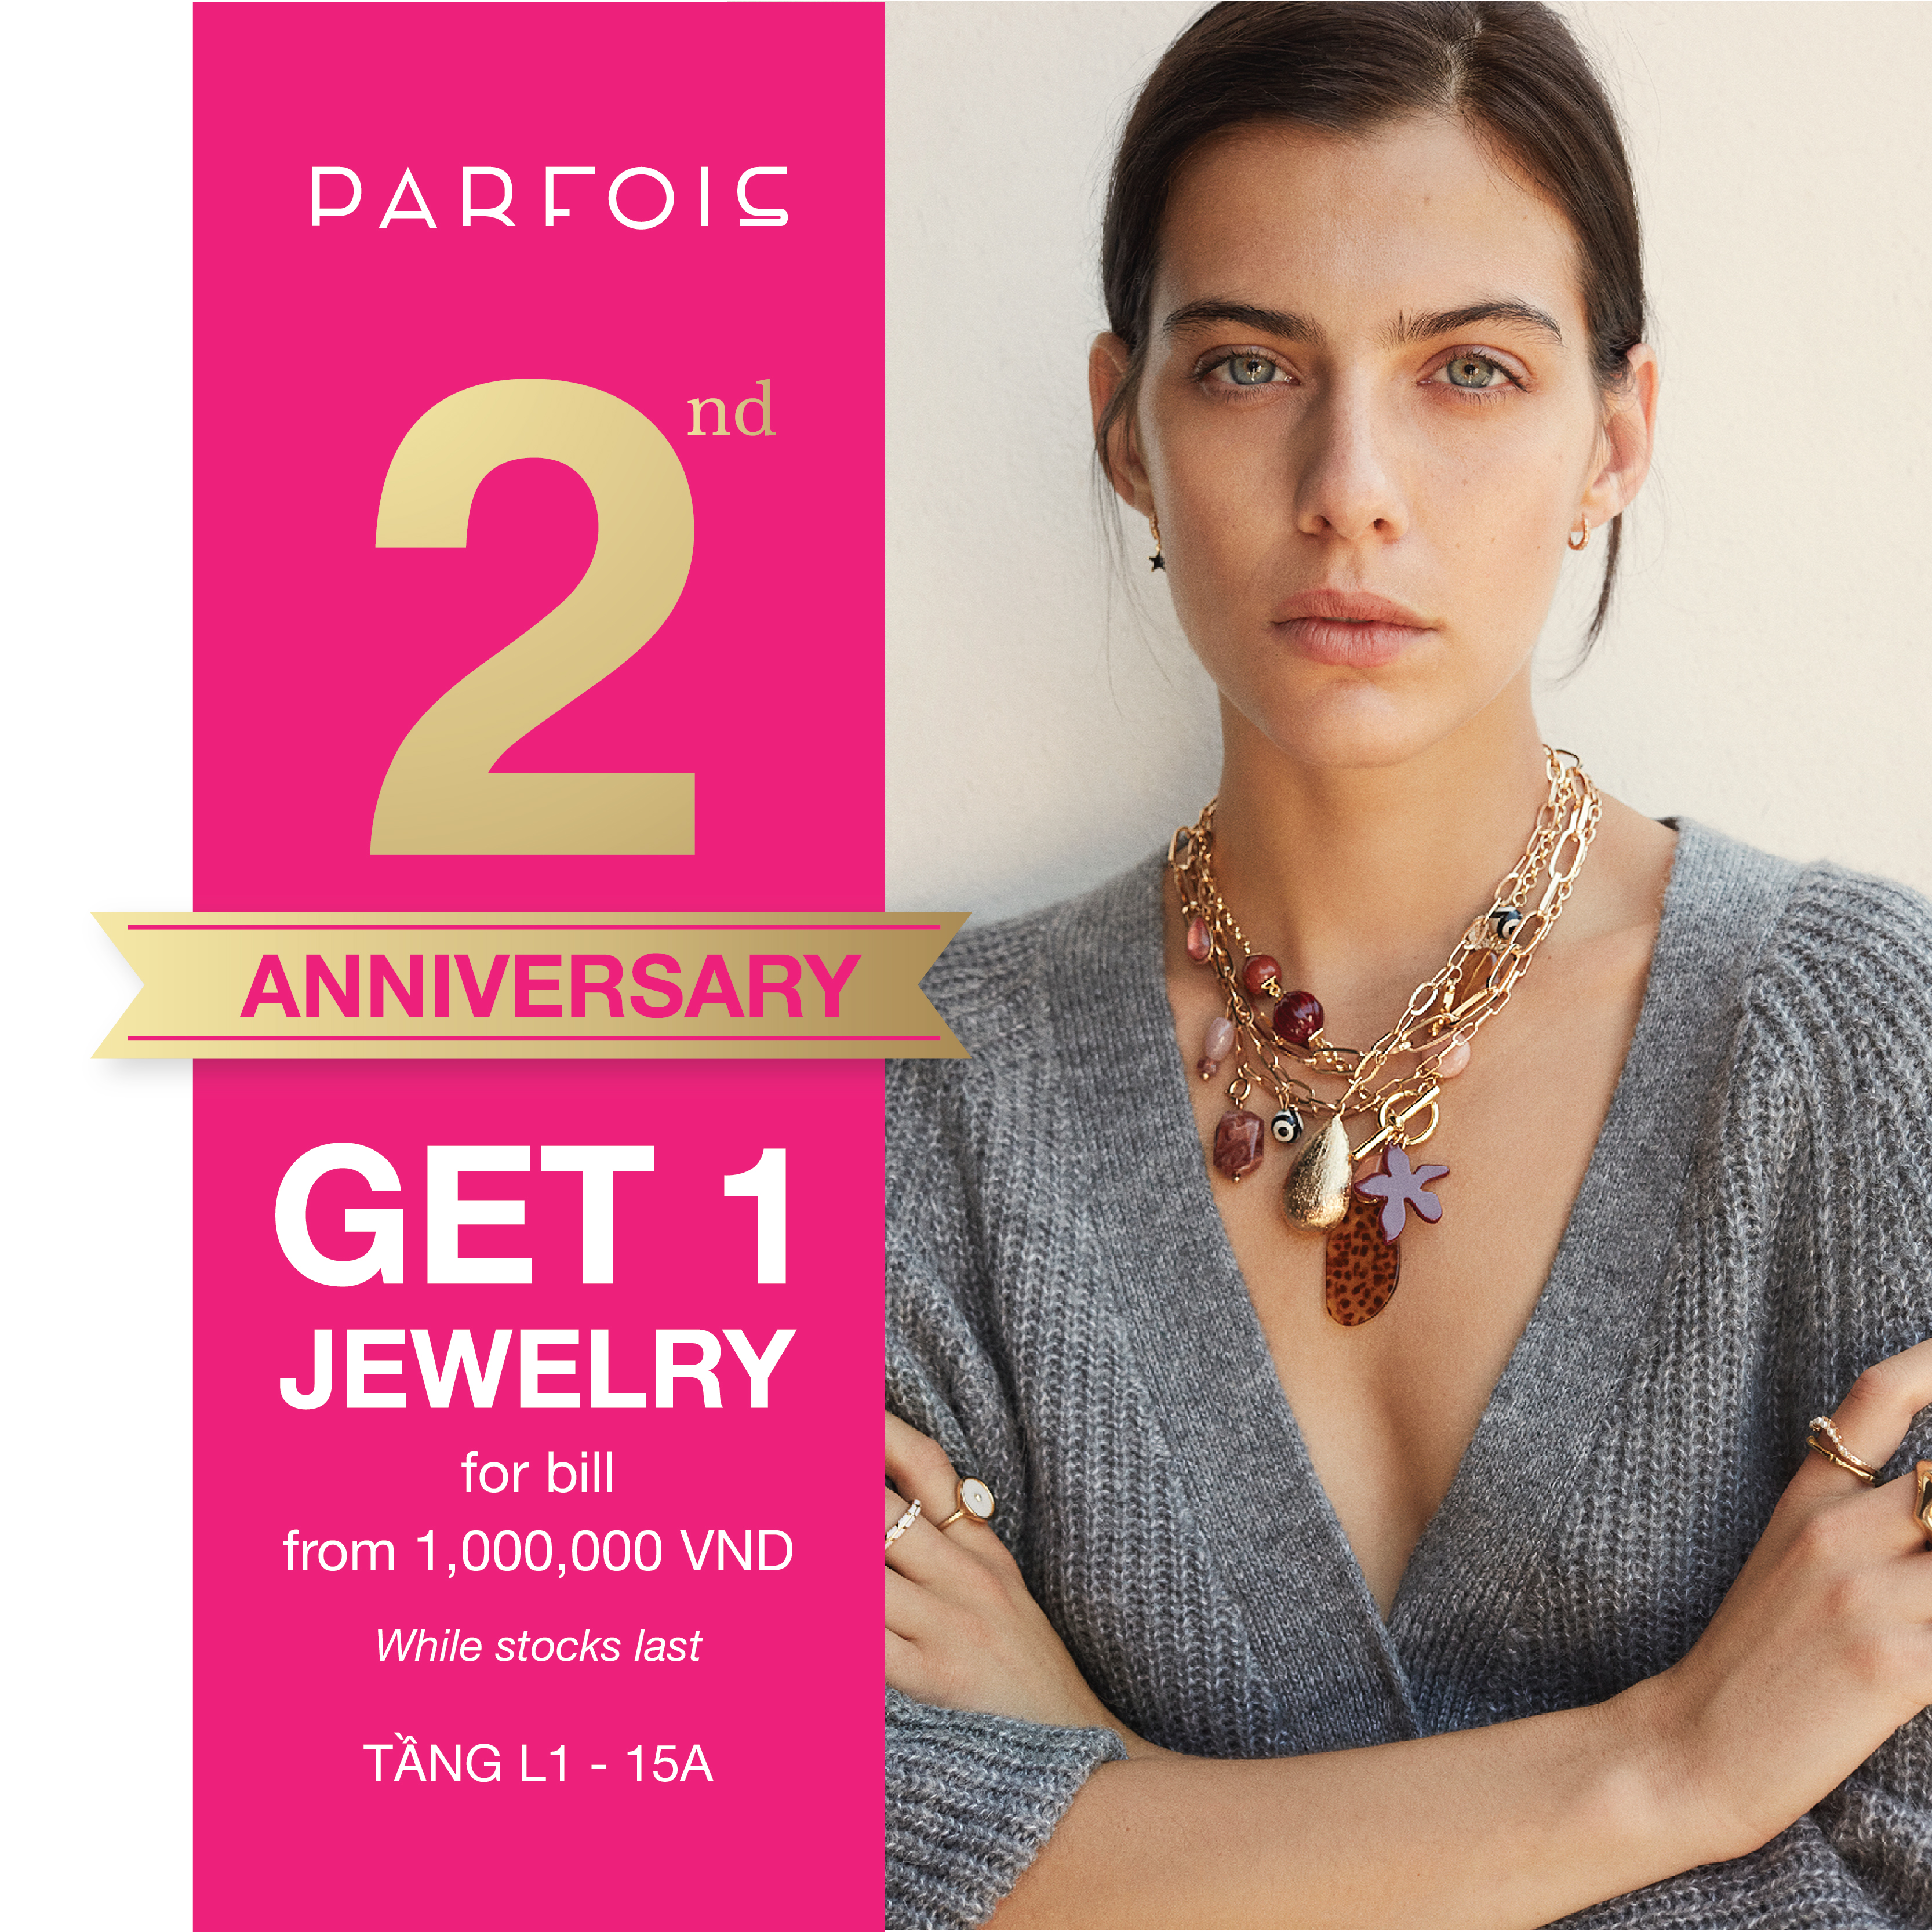 GET FREE JEWELRY FROM PARFOIS